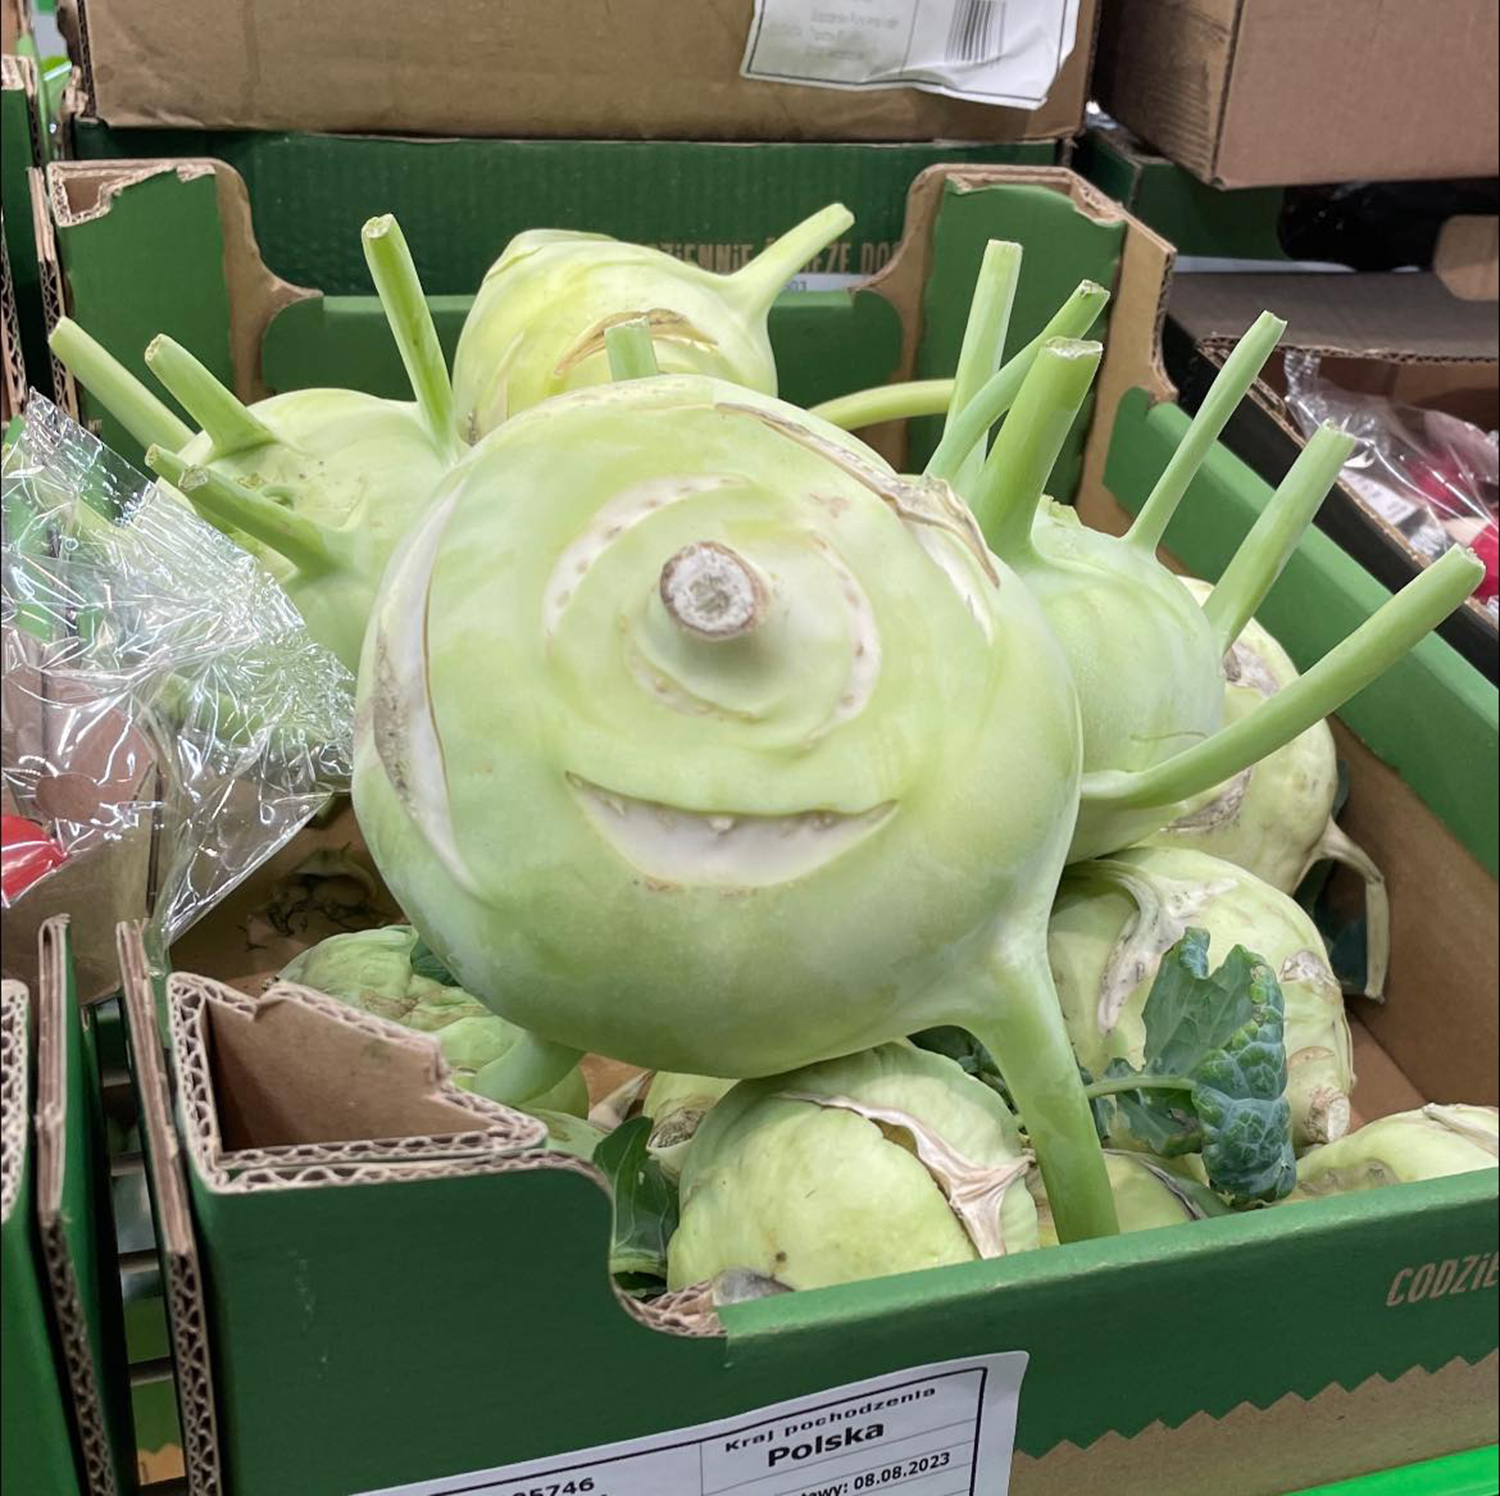 A shopper discovers a turnip resembling 'Monsters Inc' character Mike Wazowski during his weekly grocery run, leaving him amazed by the uncanny resemblance.